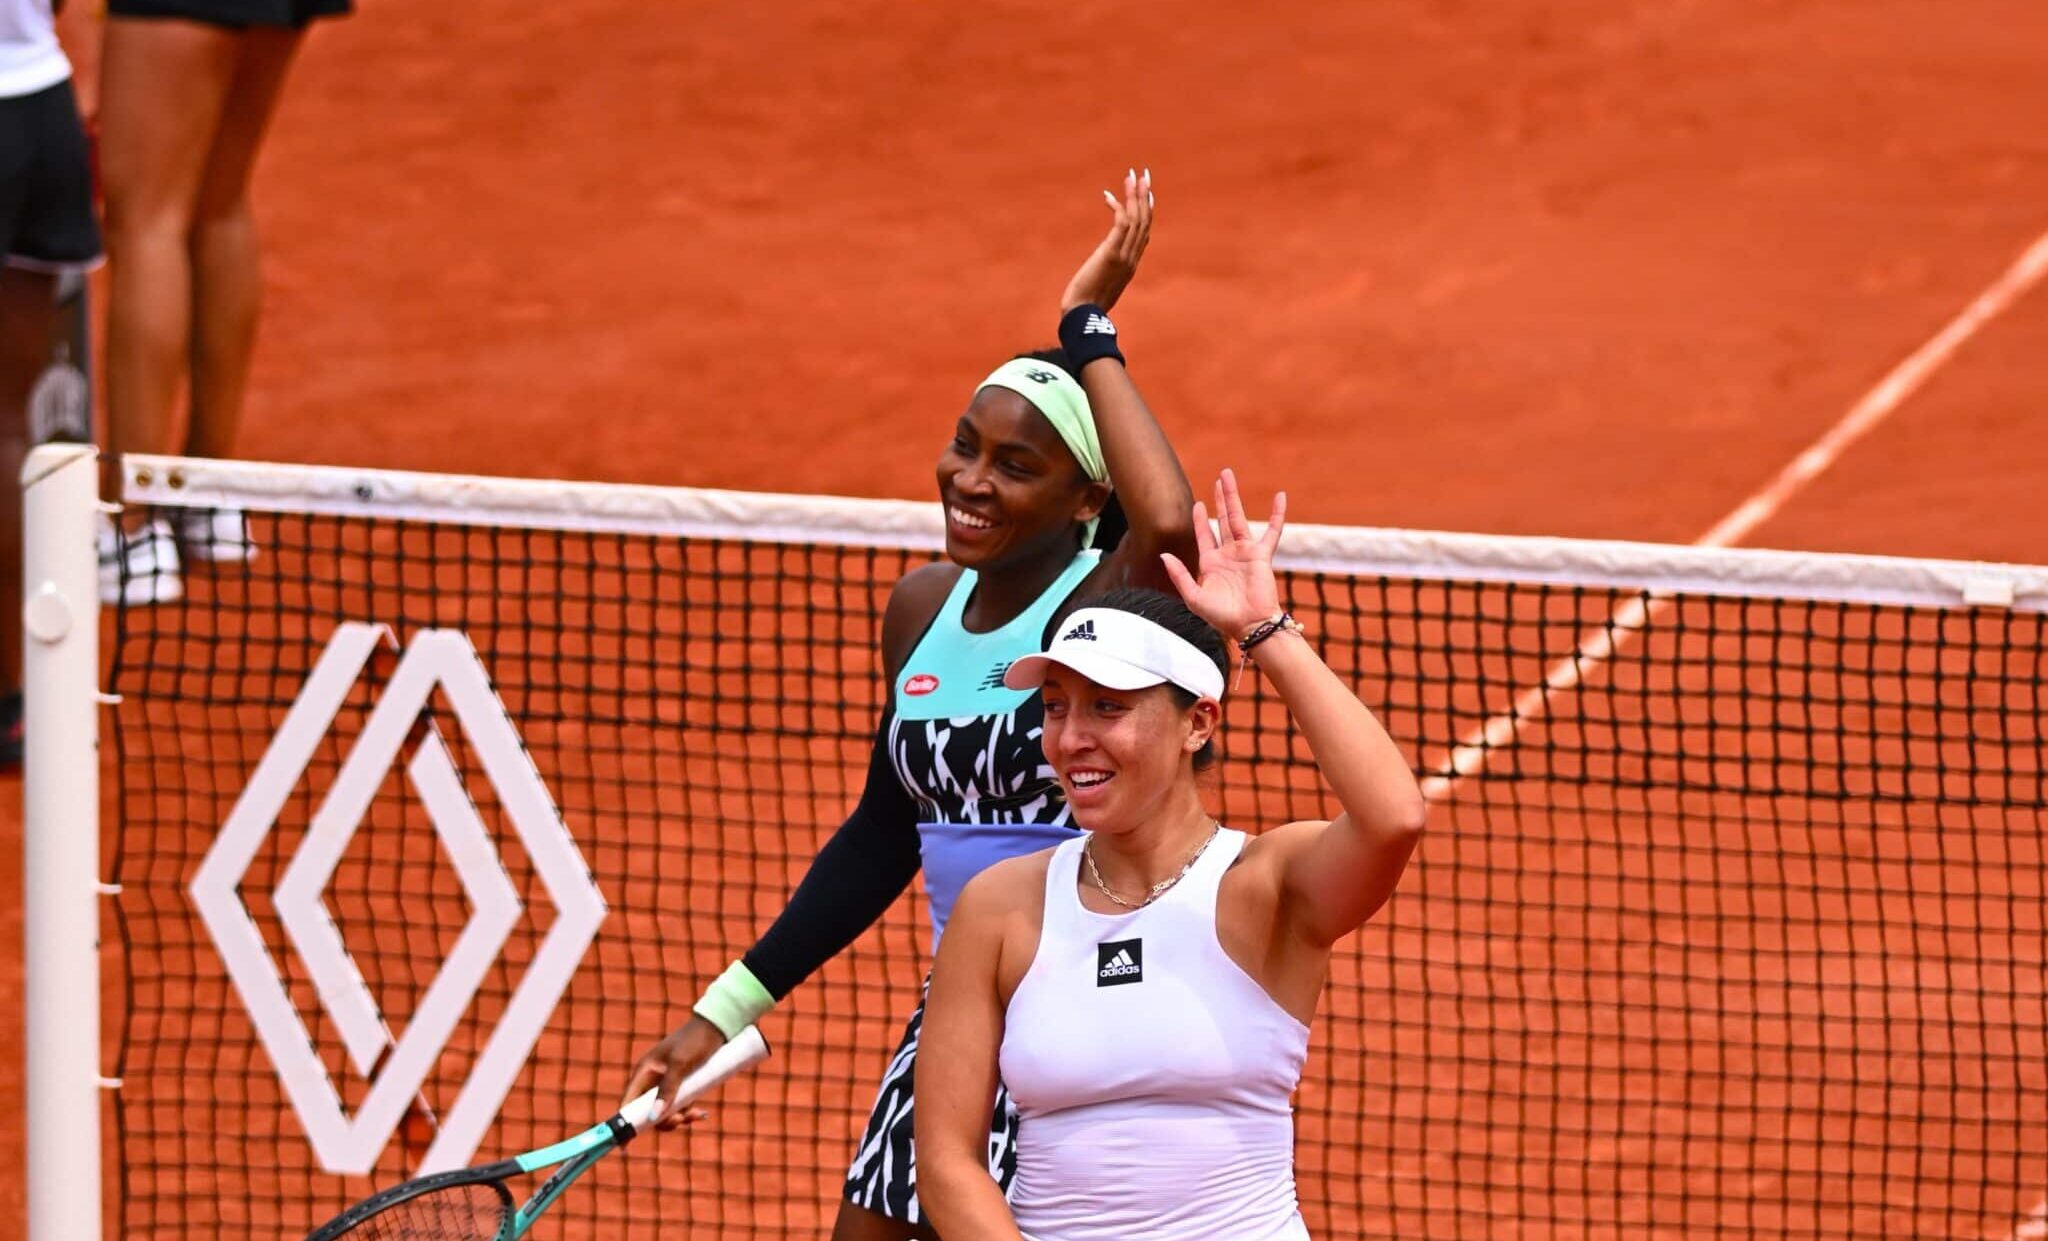 French Open Prize Pool Skyrockets To Record 54.6M